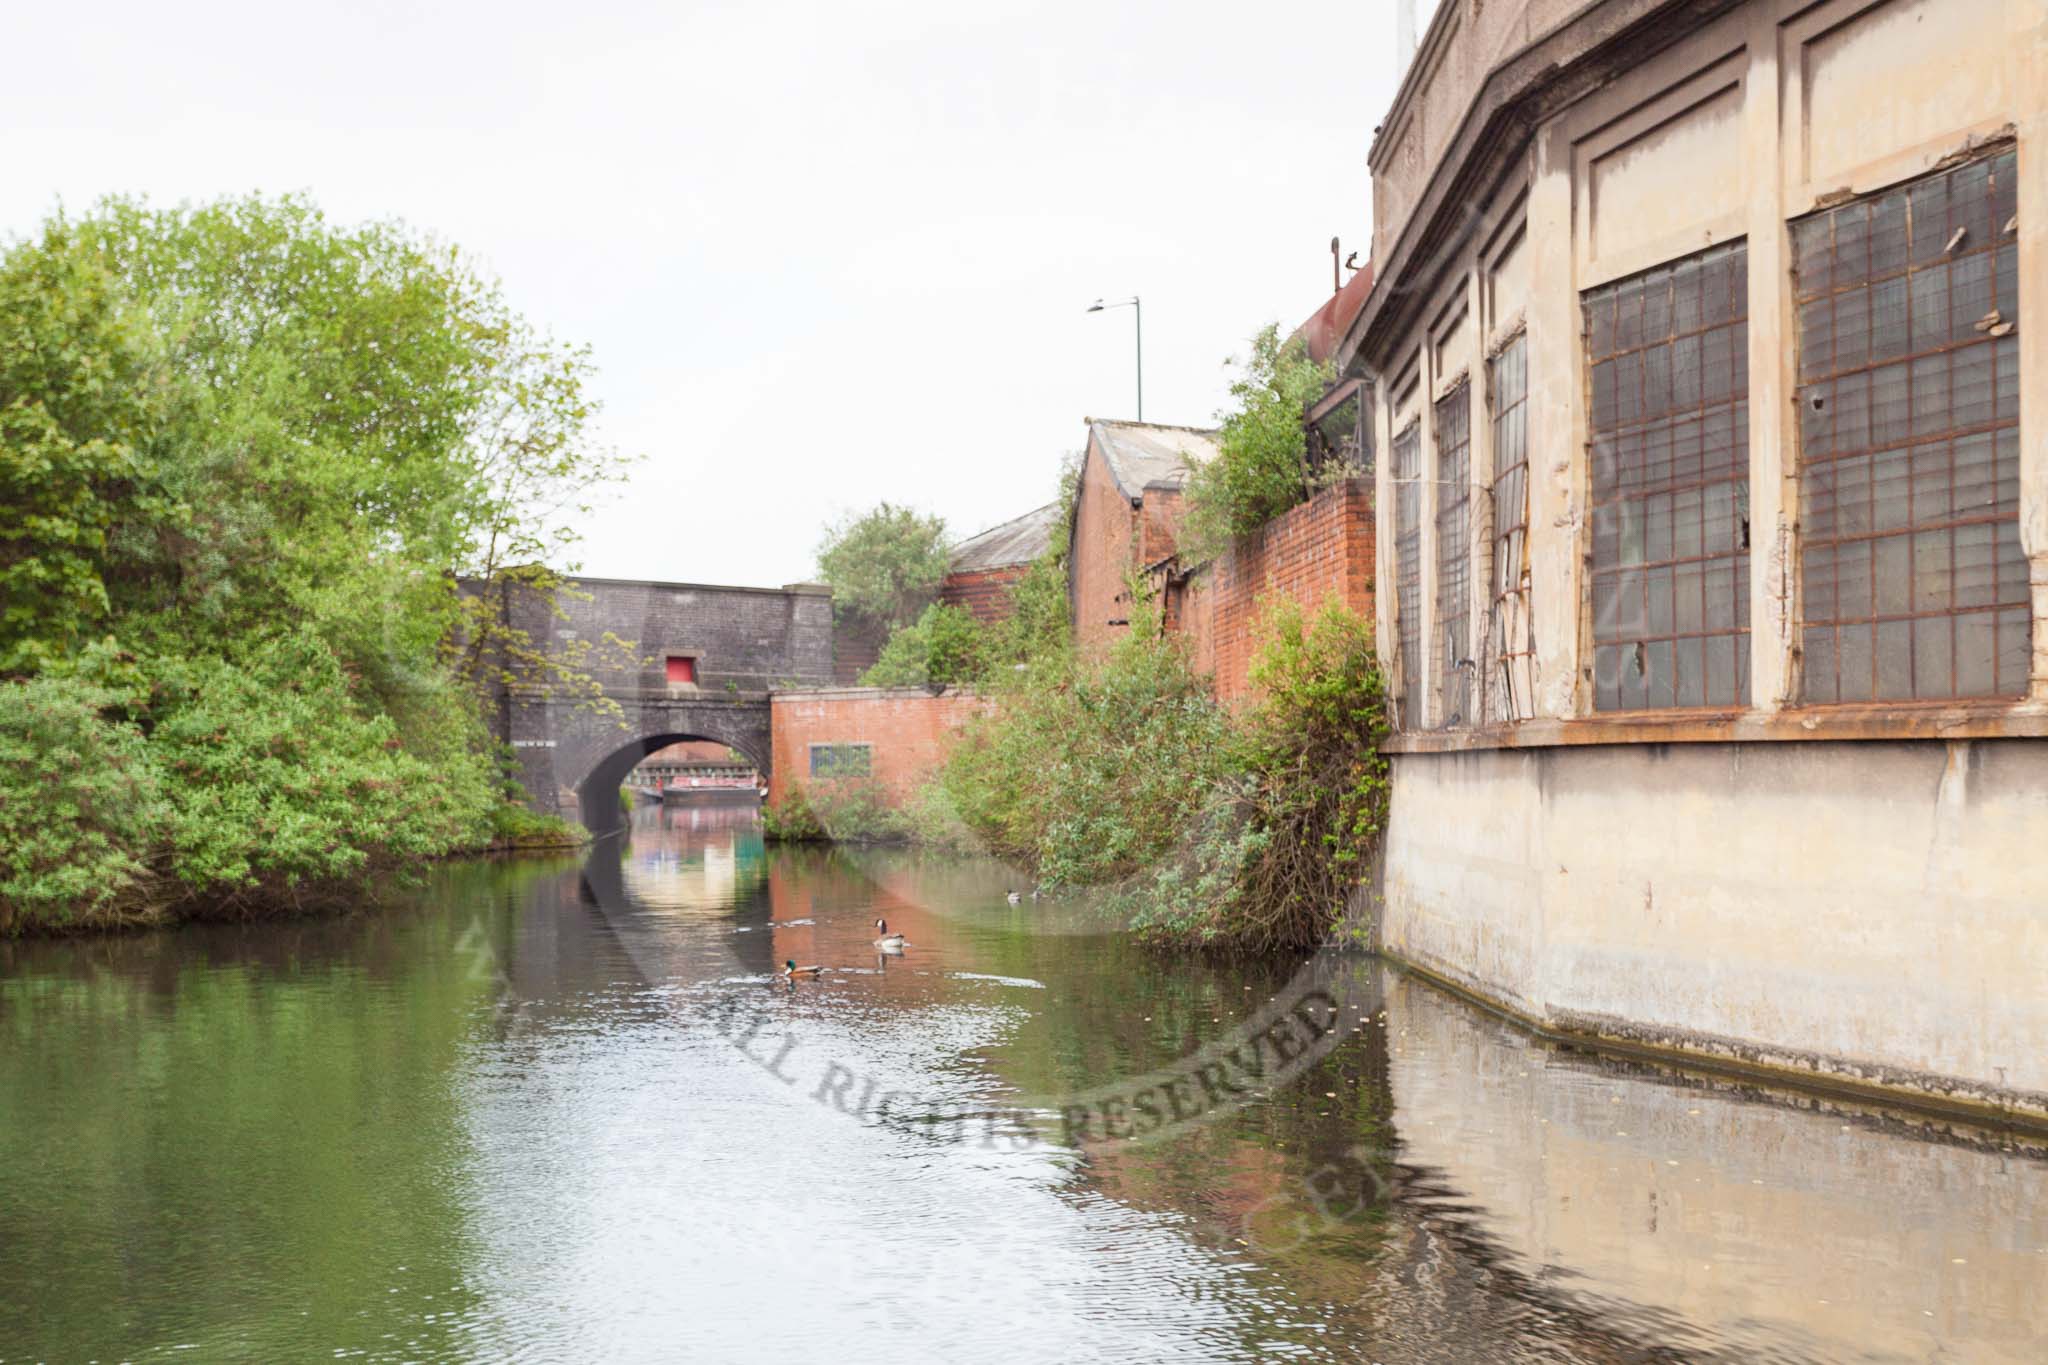 BCN 24h Marathon Challenge 2015: Icknield Port Loop, with old industry on the right, and the Icknield Port Road Bridge ahead.
Birmingham Canal Navigations,



on 23 May 2015 at 08:47, image #14